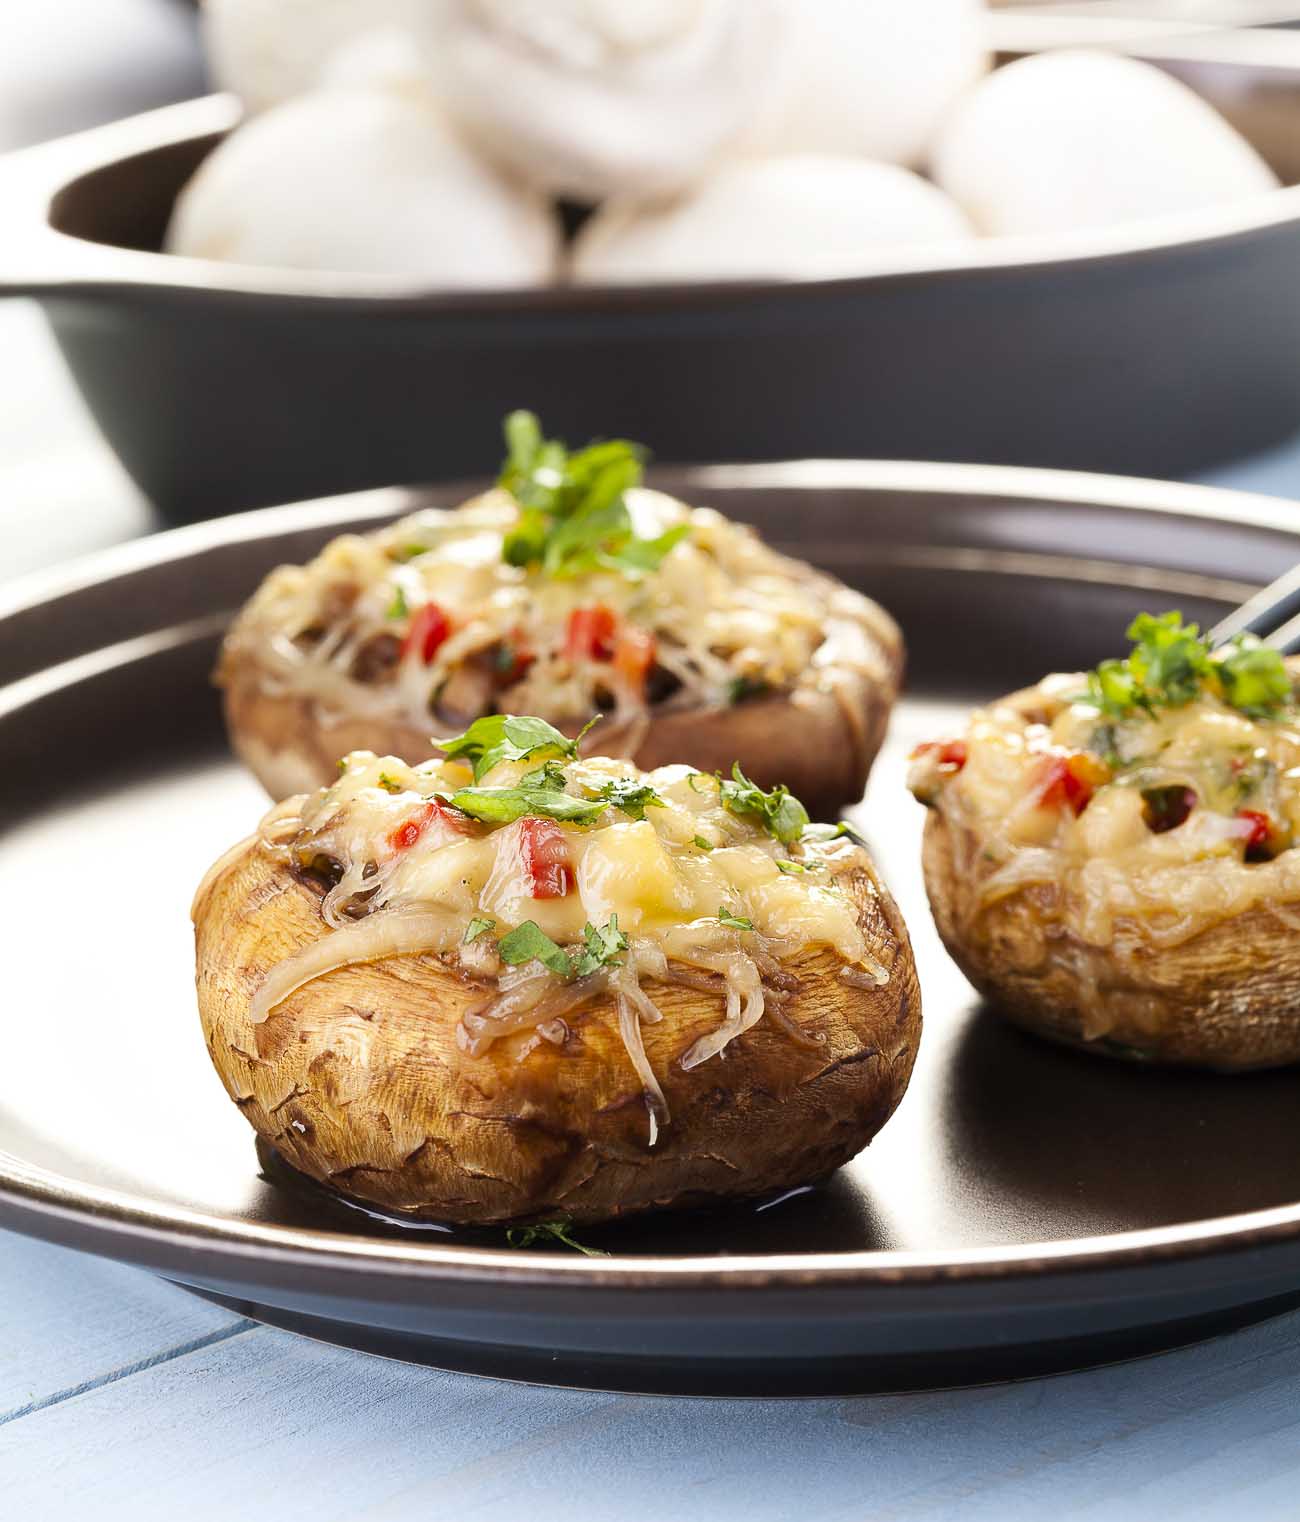 Baked Stuffed Mushrooms With Cheese Recipe